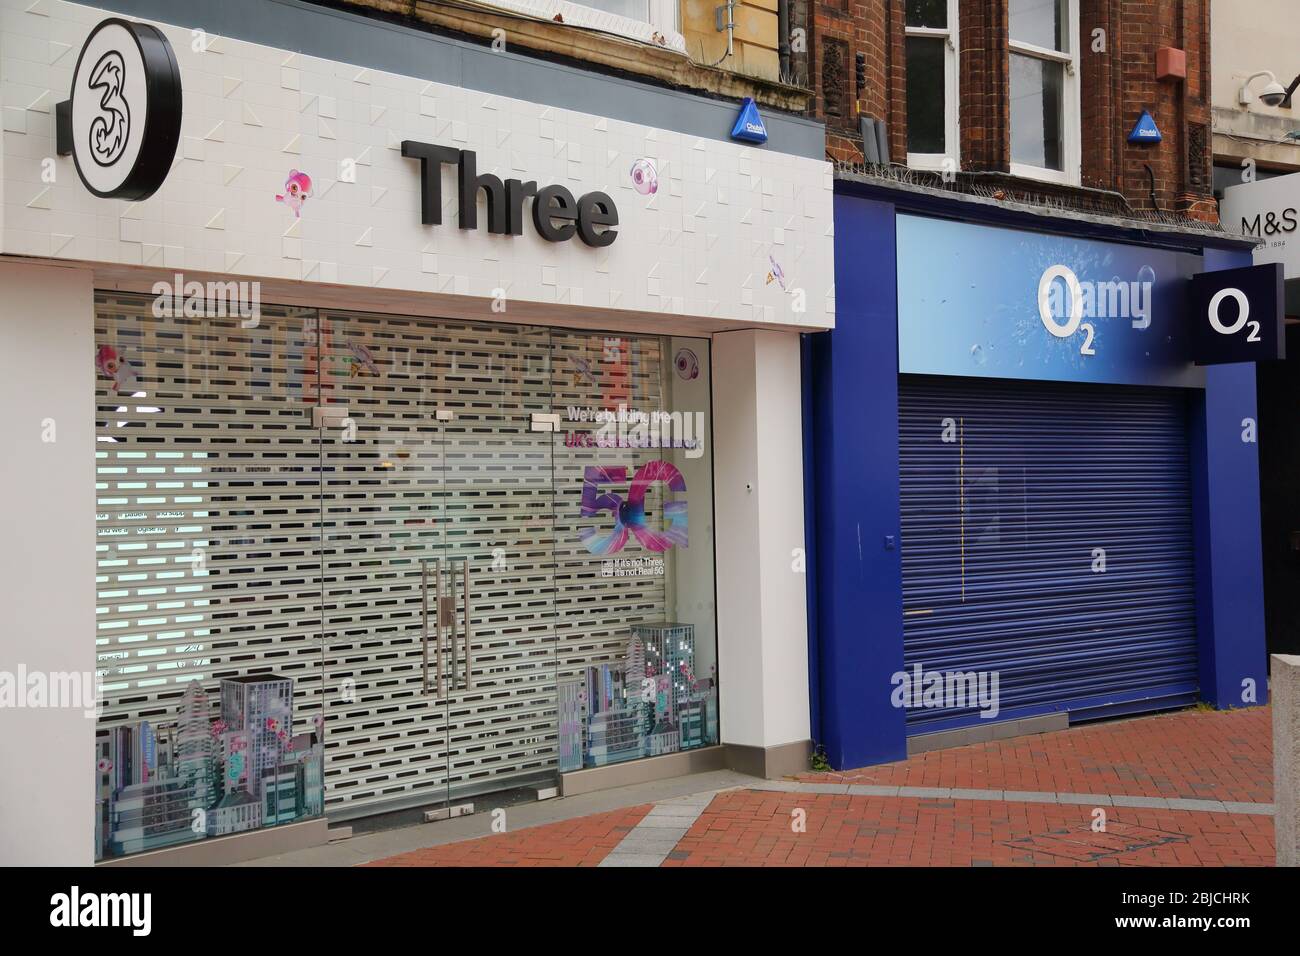 Retail outlets for the telecommunications companies 3 and O2 in Broad Street, Reading, UK Stock Photo